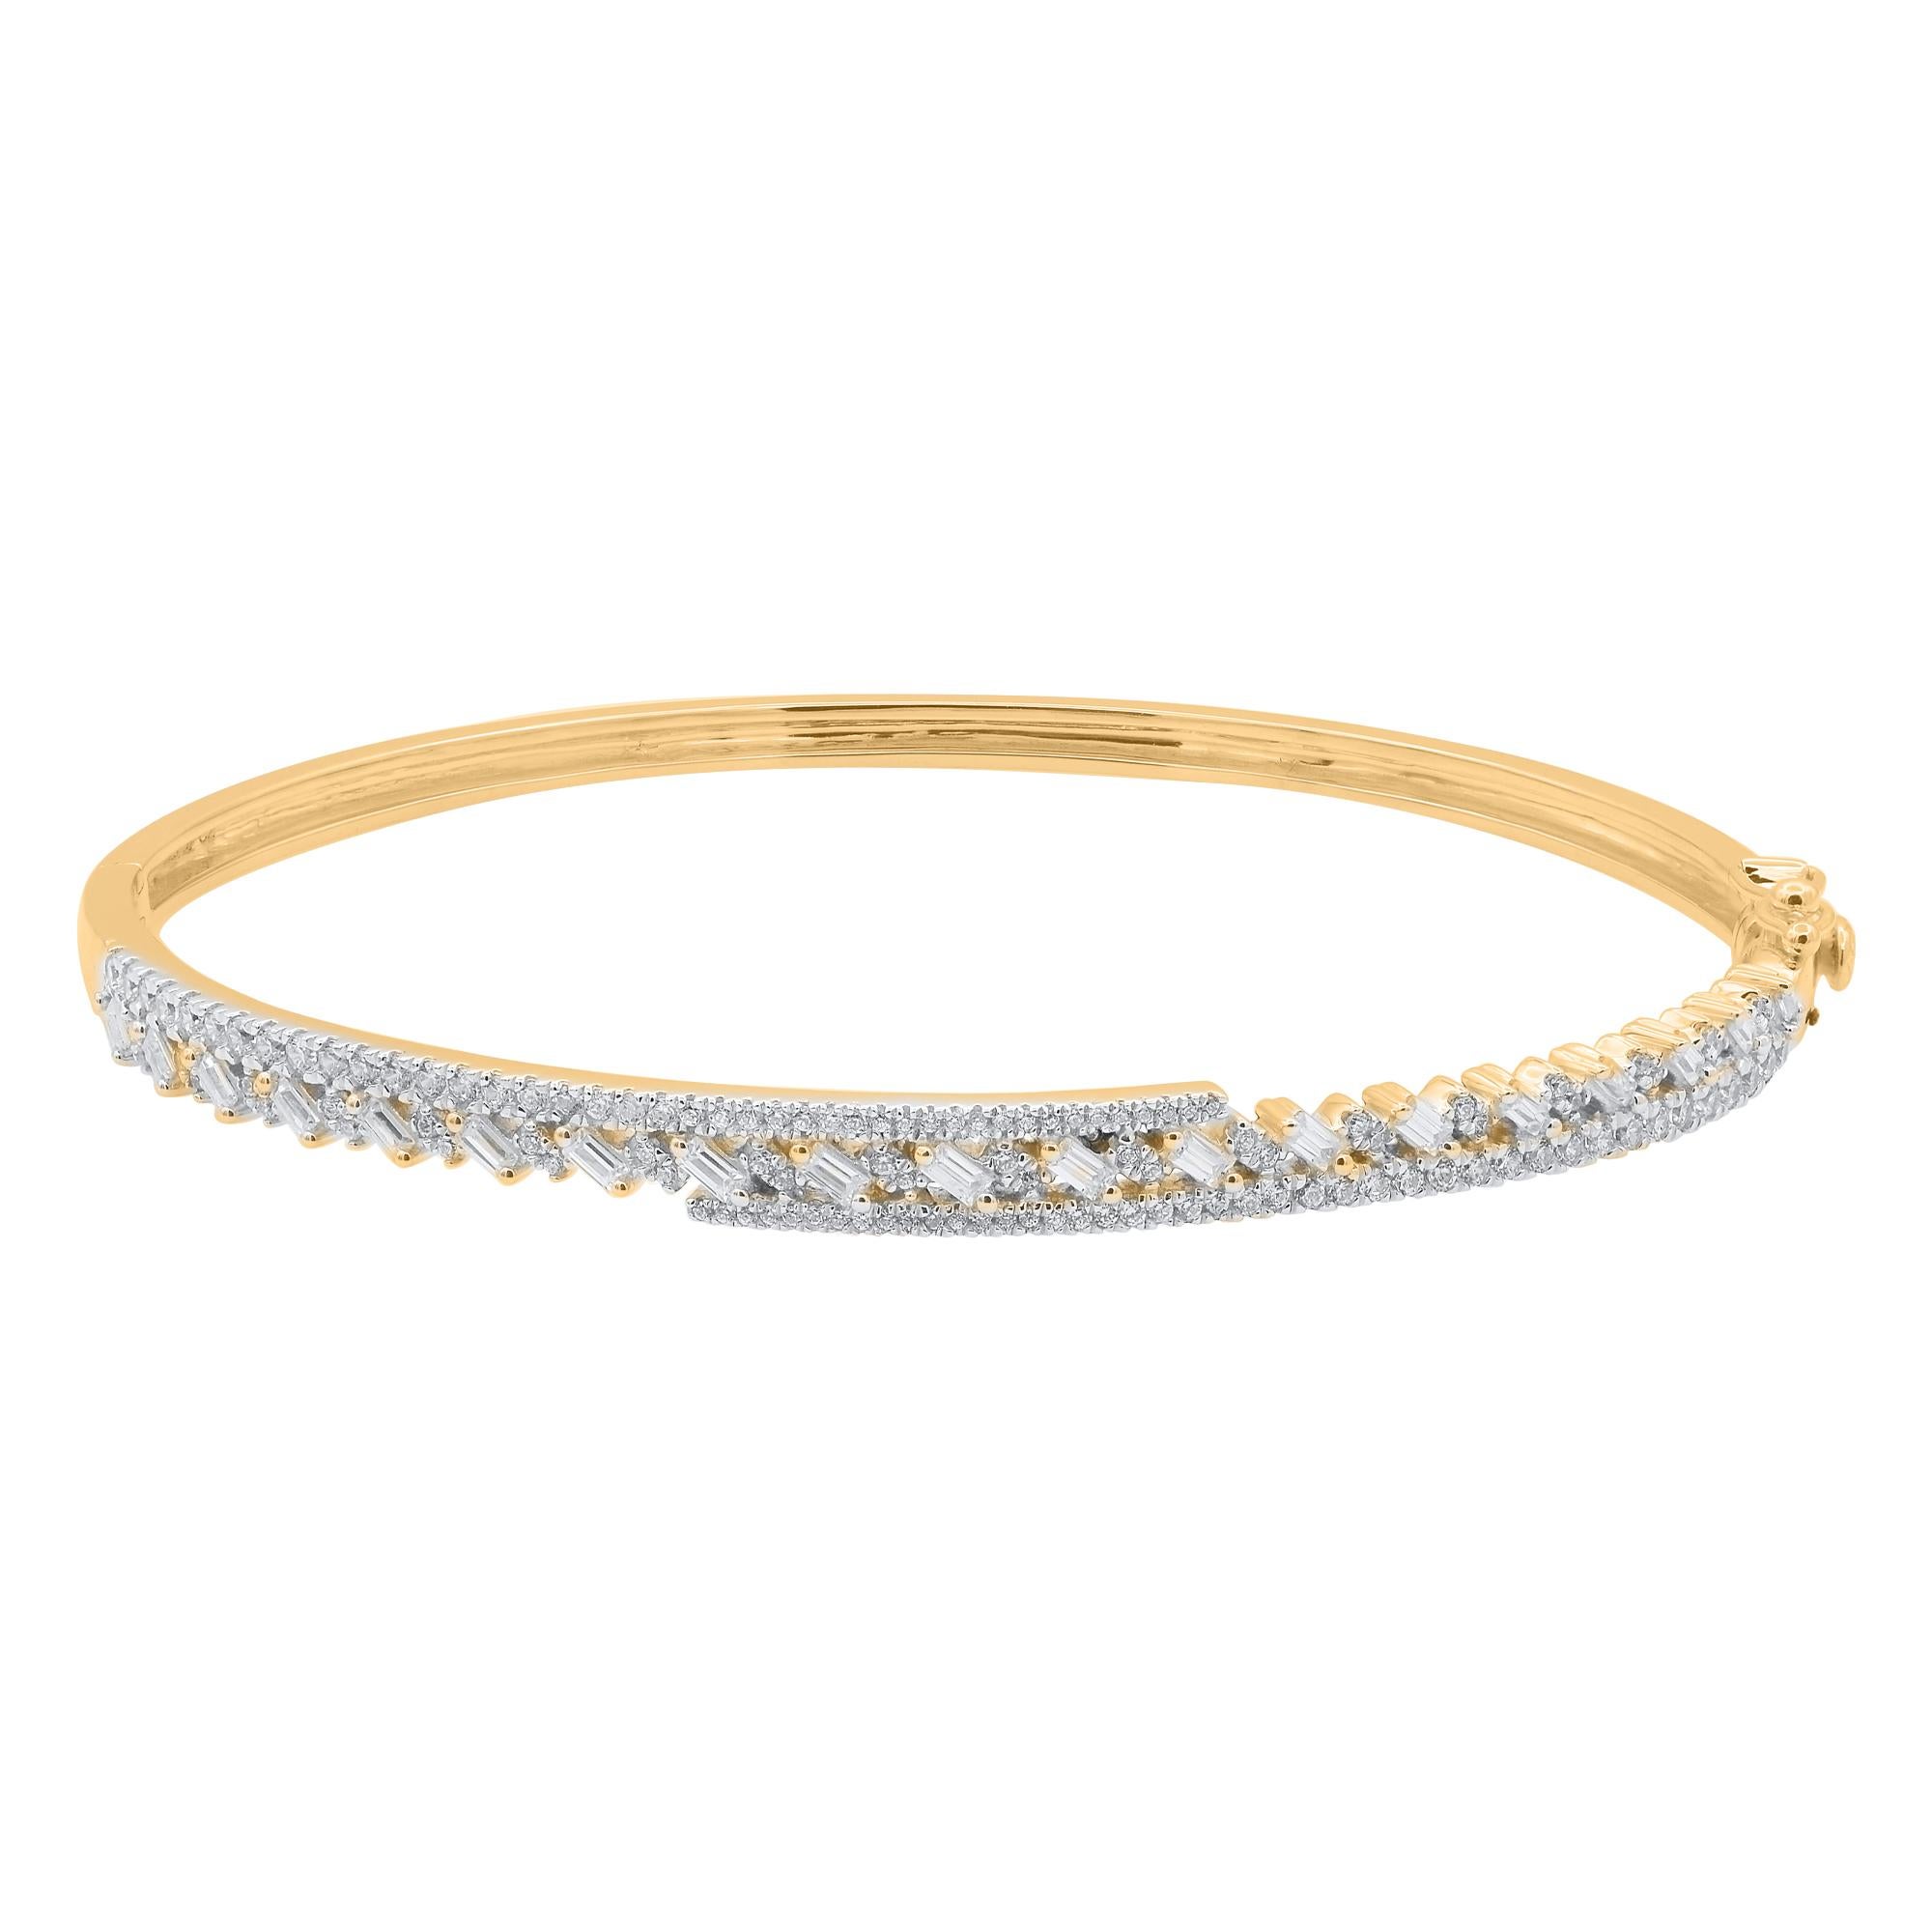 TJD 1.0 Ct Natural Round & Baguette Diamond Bangle Bracelet in 14KT Yellow Gold For Sale